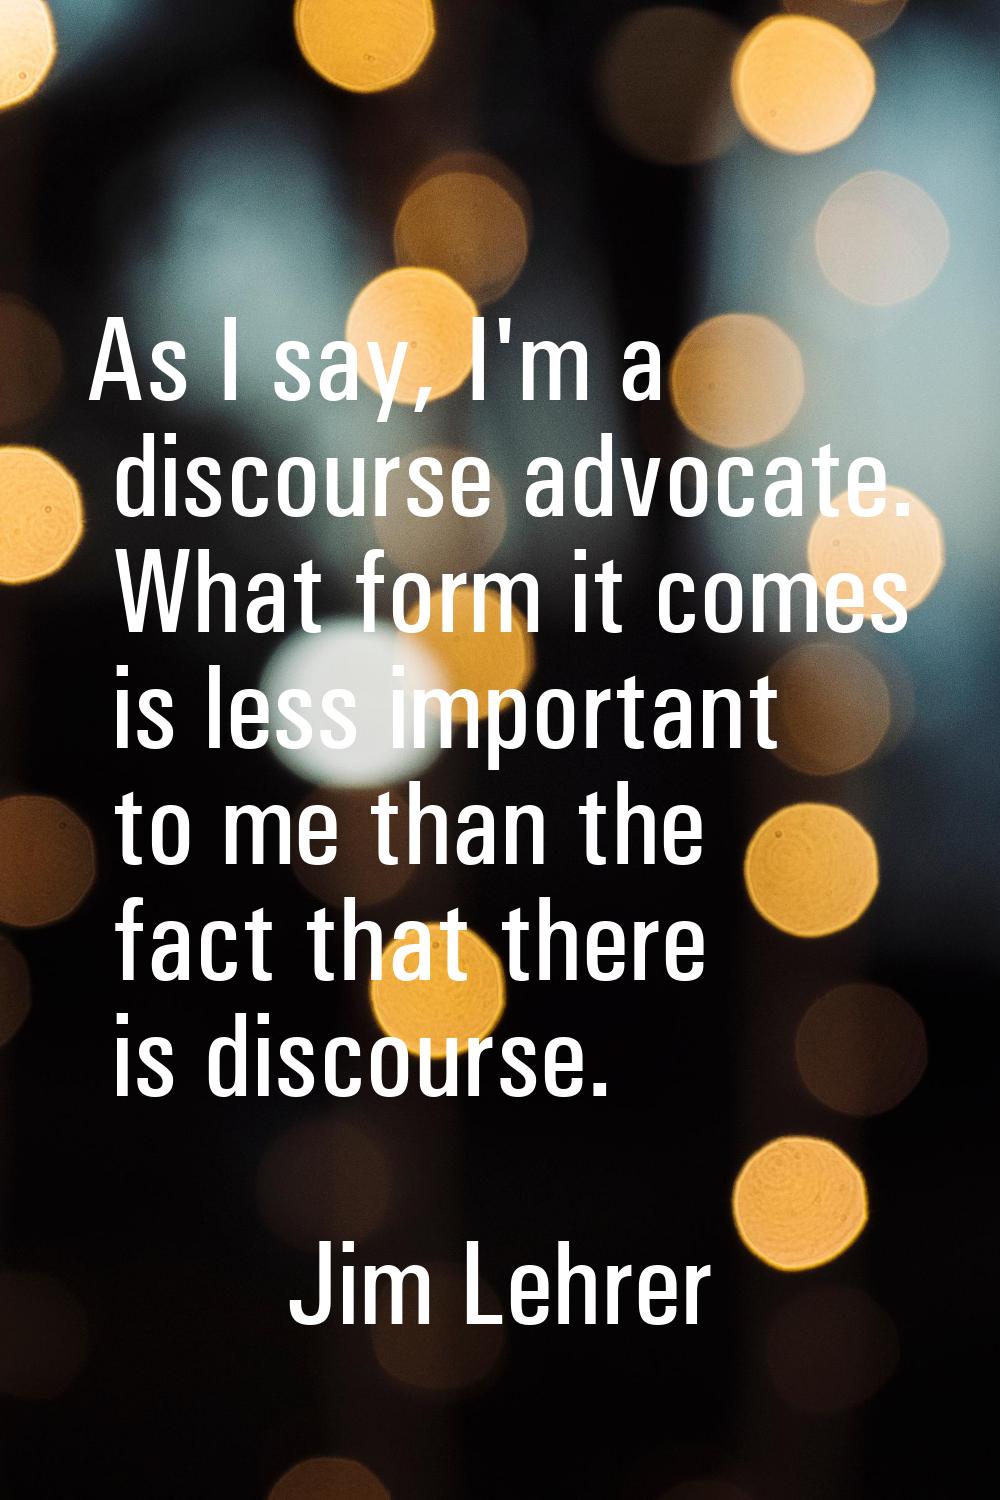 As I say, I'm a discourse advocate. What form it comes is less important to me than the fact that t